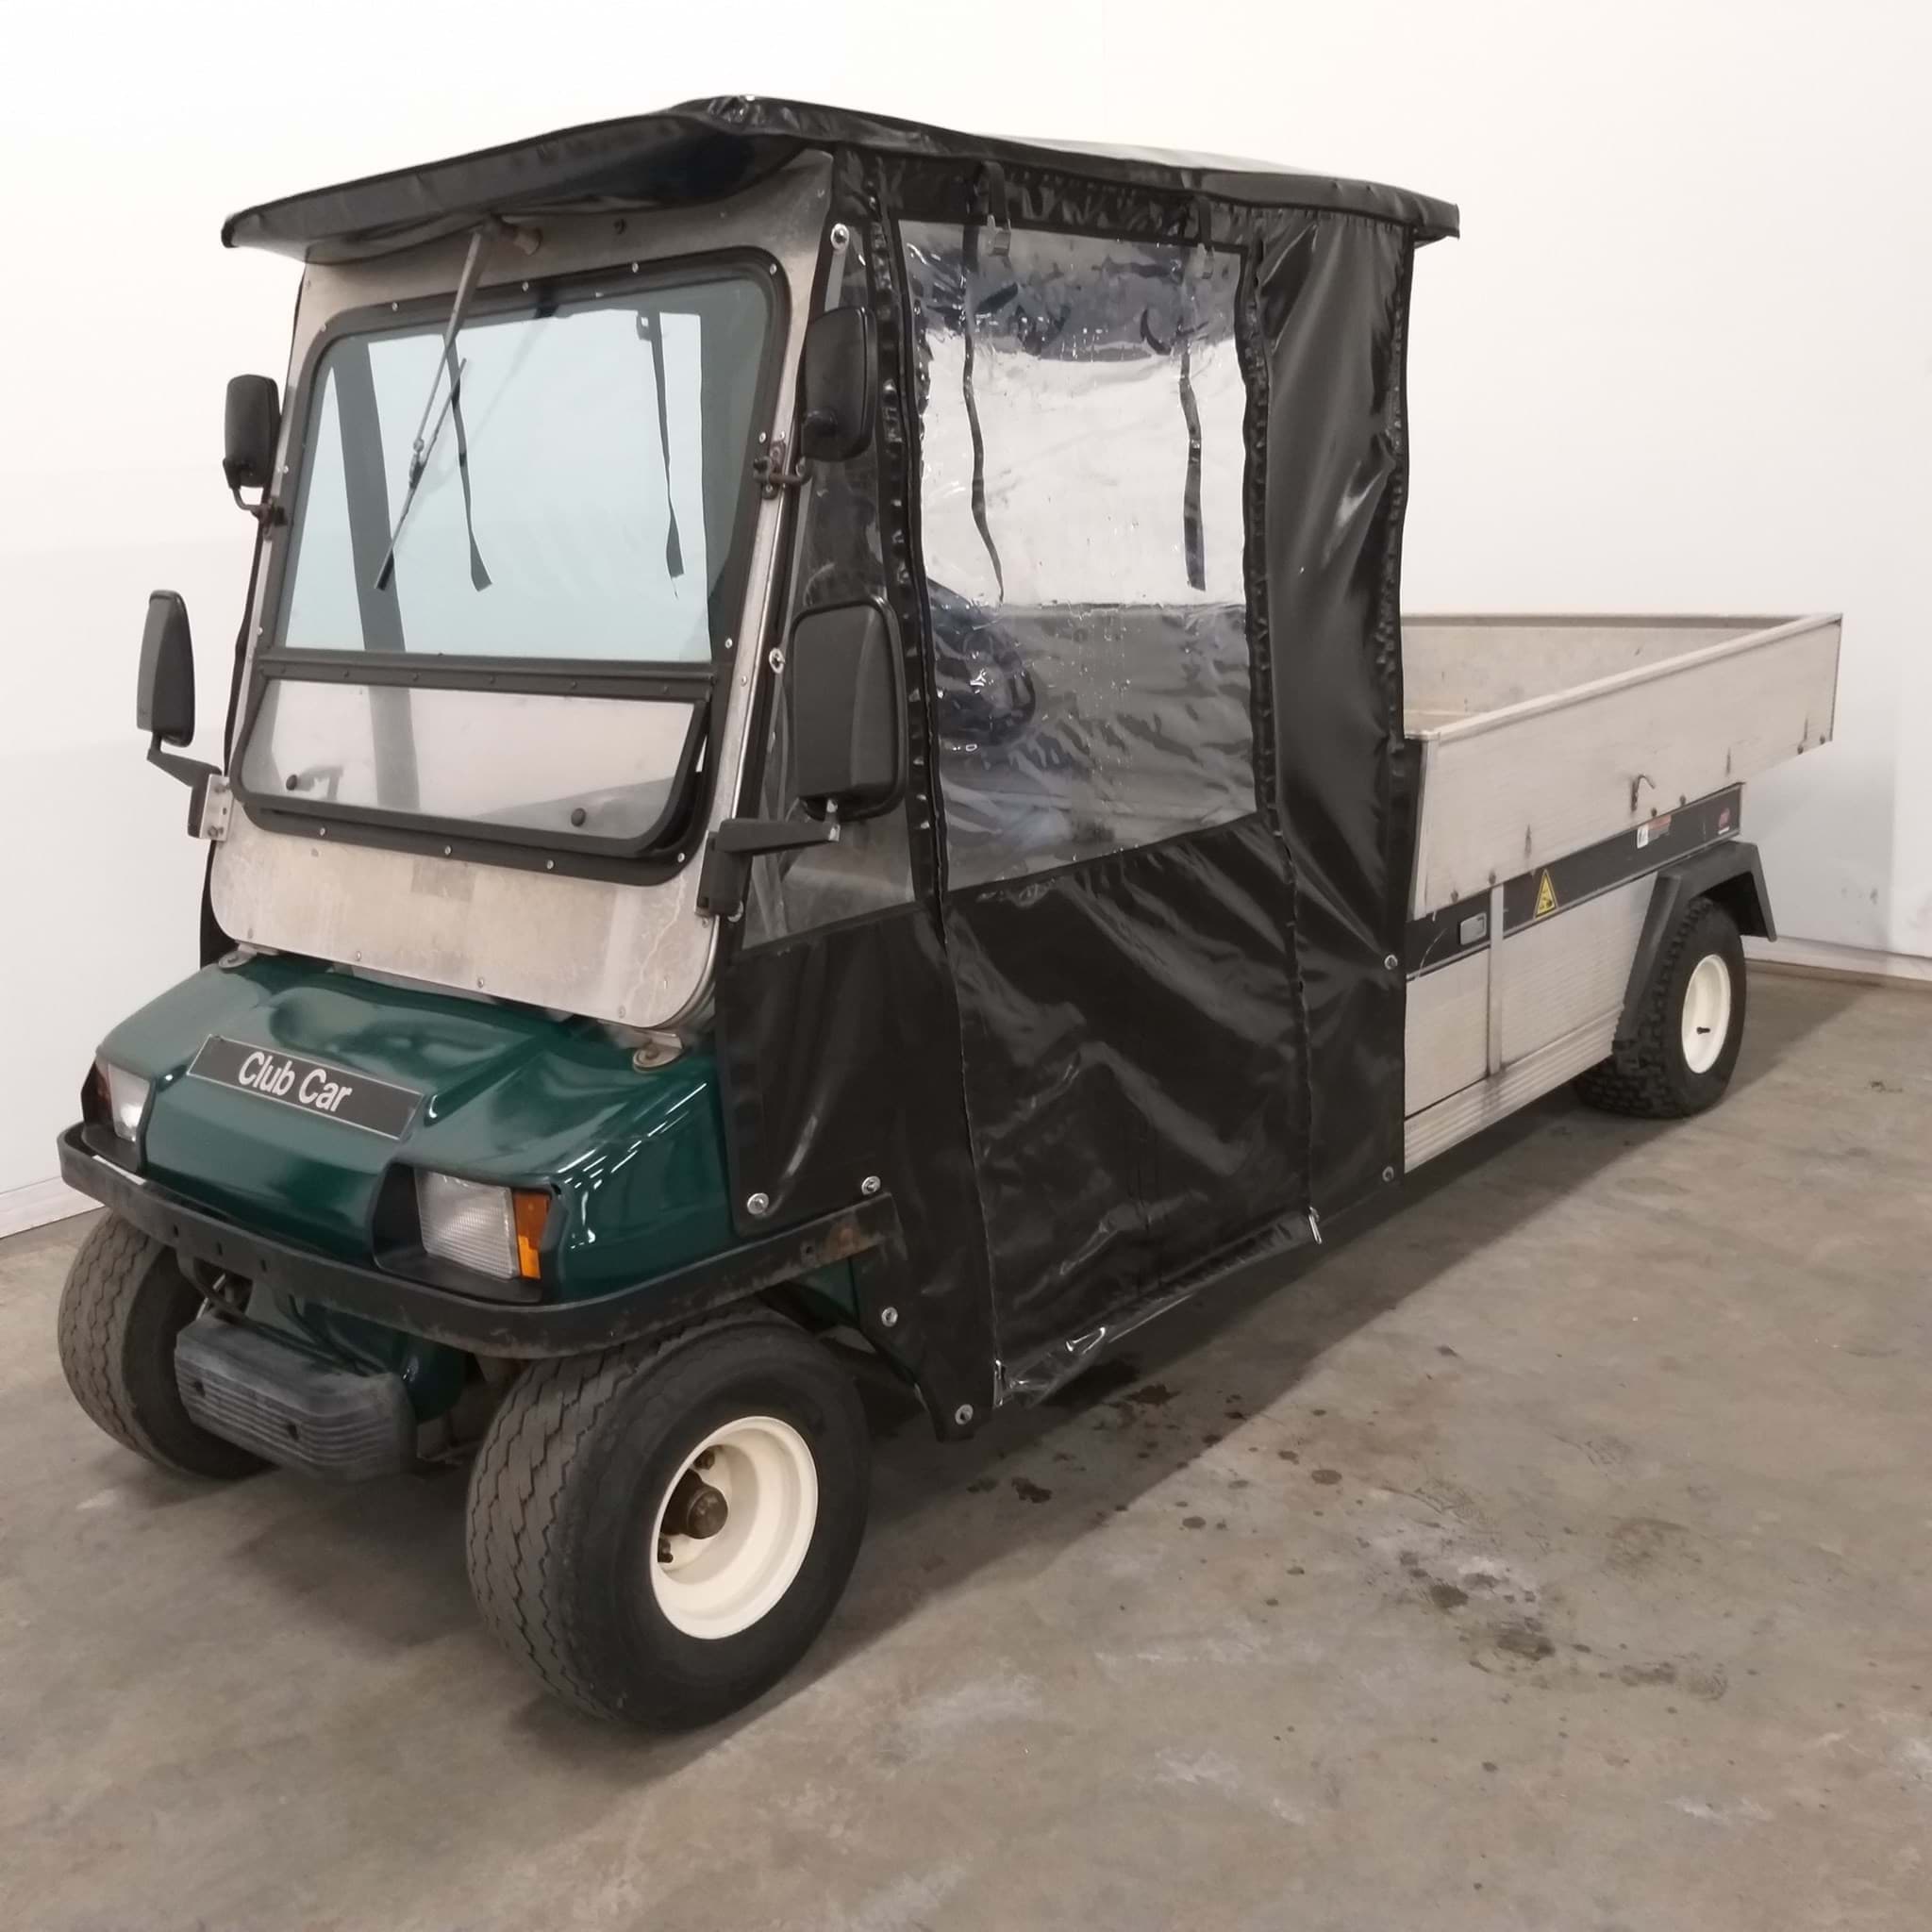 Picture of Trade - 2005 - Electric - Club Car - Carryall 6 - Open cargo box -  Green